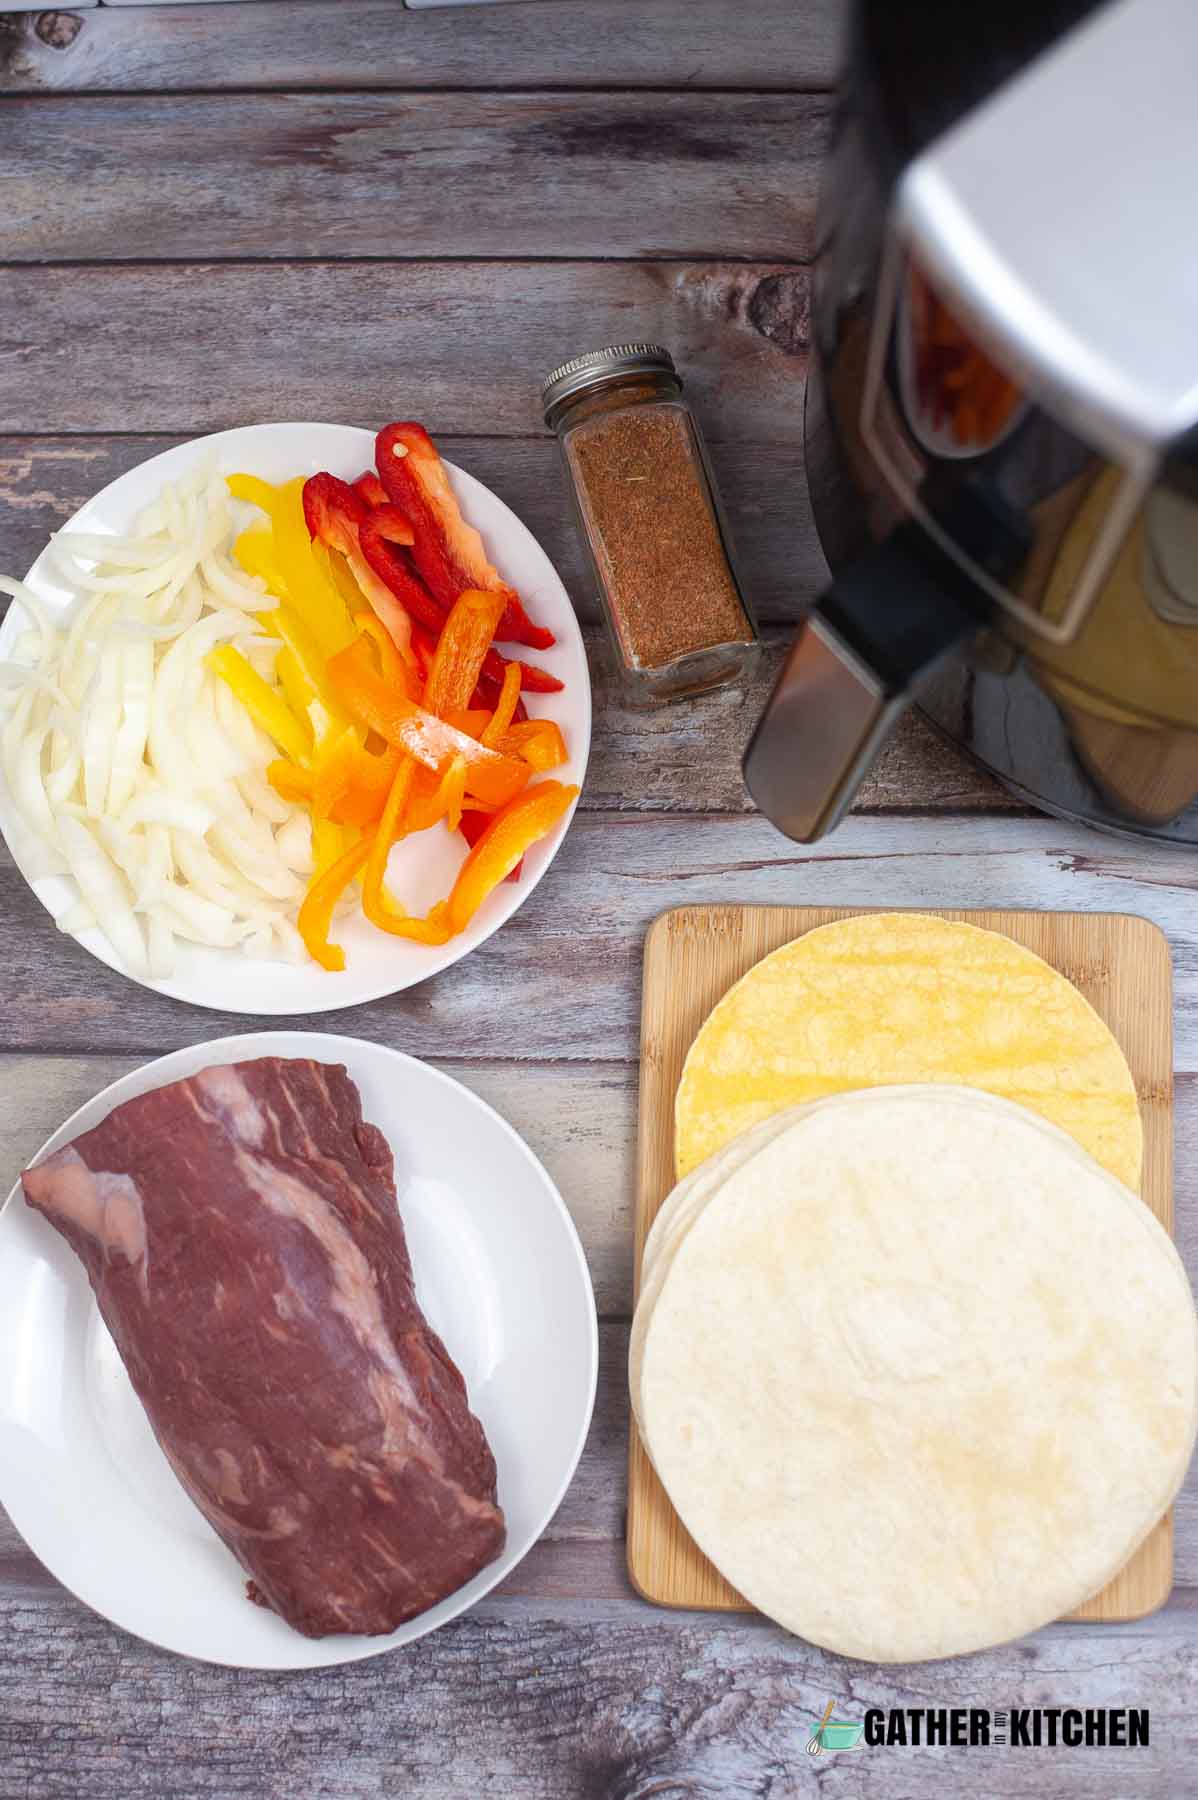 Top down view of plate of sliced onions and bell peppers, container of fajita seasoning, flour and corn tortillas, and beef on a plate.